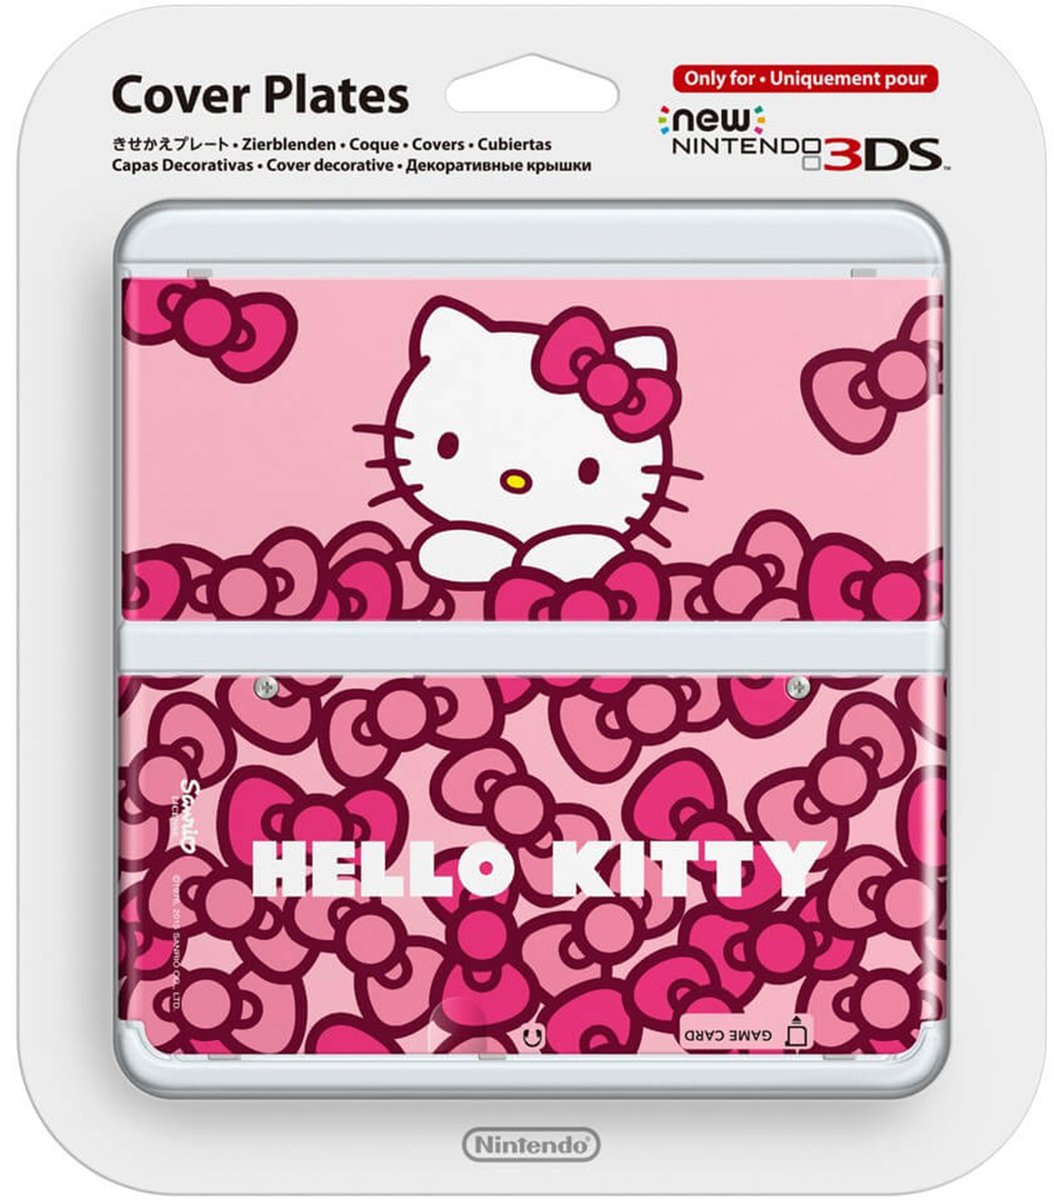 Nintendo 3DS Hello Kitty Cover Plate Review